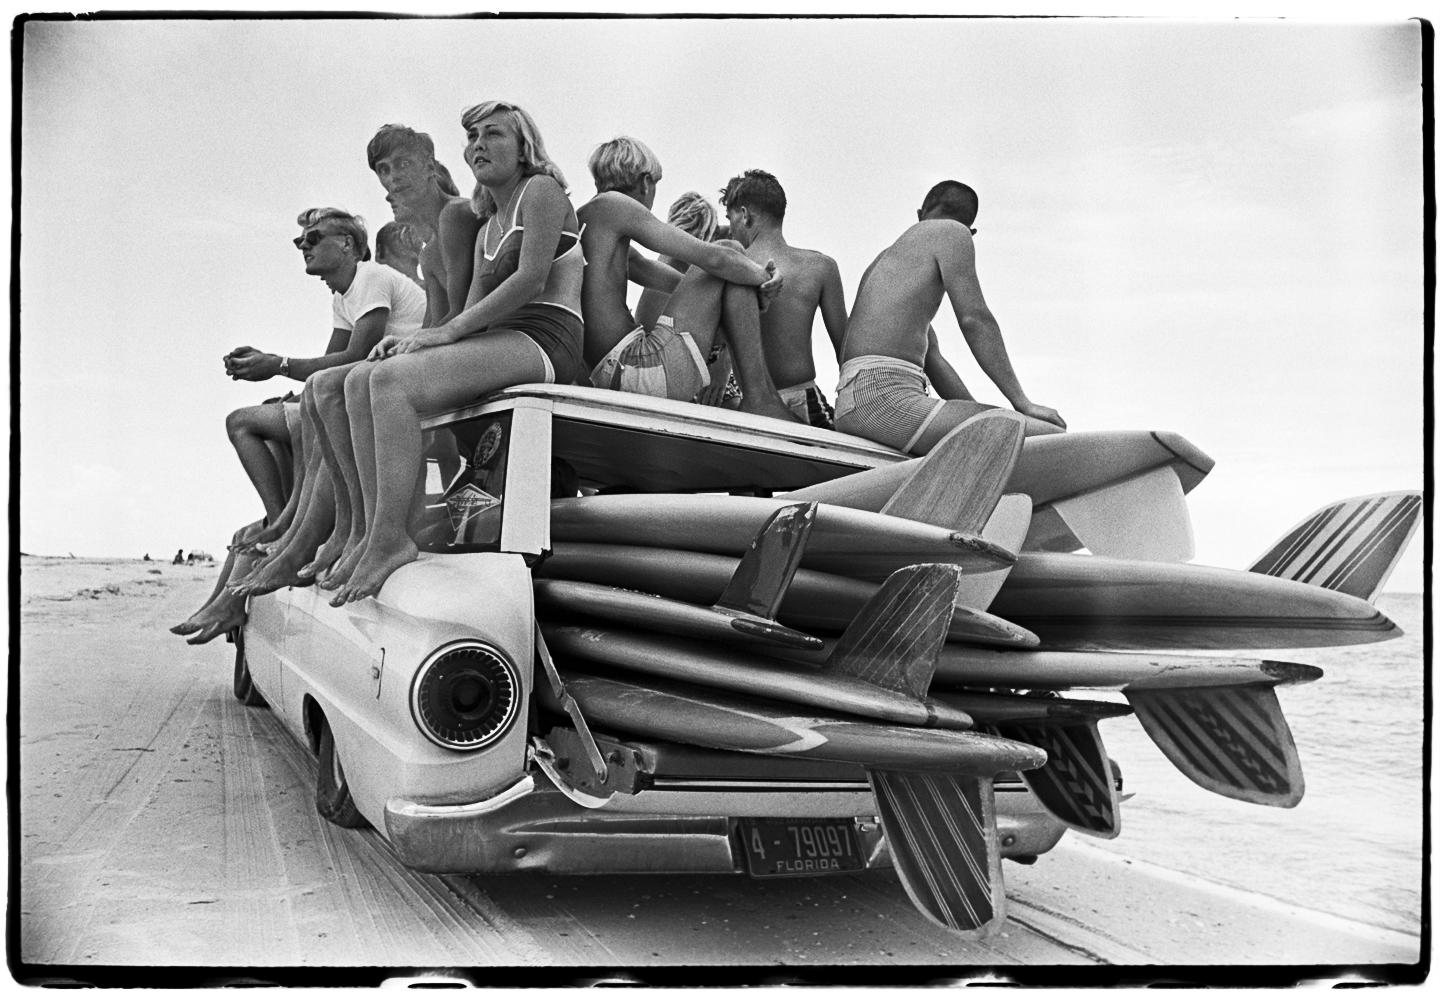 This listing contains 2 photographs by Al Satterwhite:
Surf Wagon, St. Petersburg Beach, FL, 1964
16 x 20 in. Edition of 25
Surfboards in the Sand, 1964
16 x 20, Edition of 25.
Both are signed, titled, dated, print date, and numbered by Al